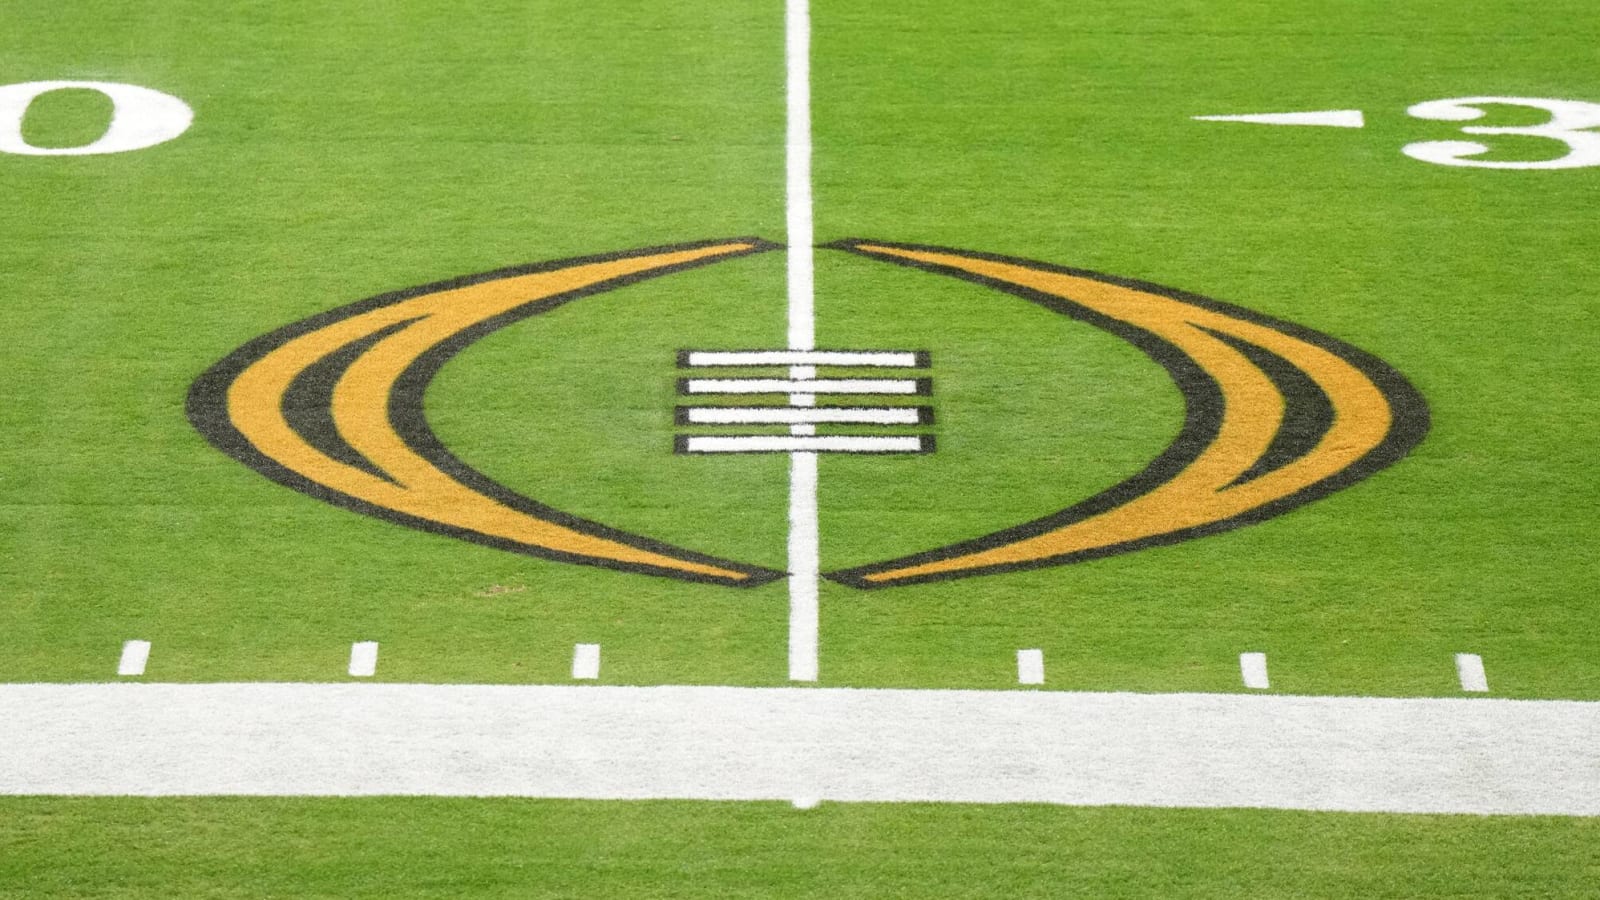 Streaming companies interested in buying CFP games